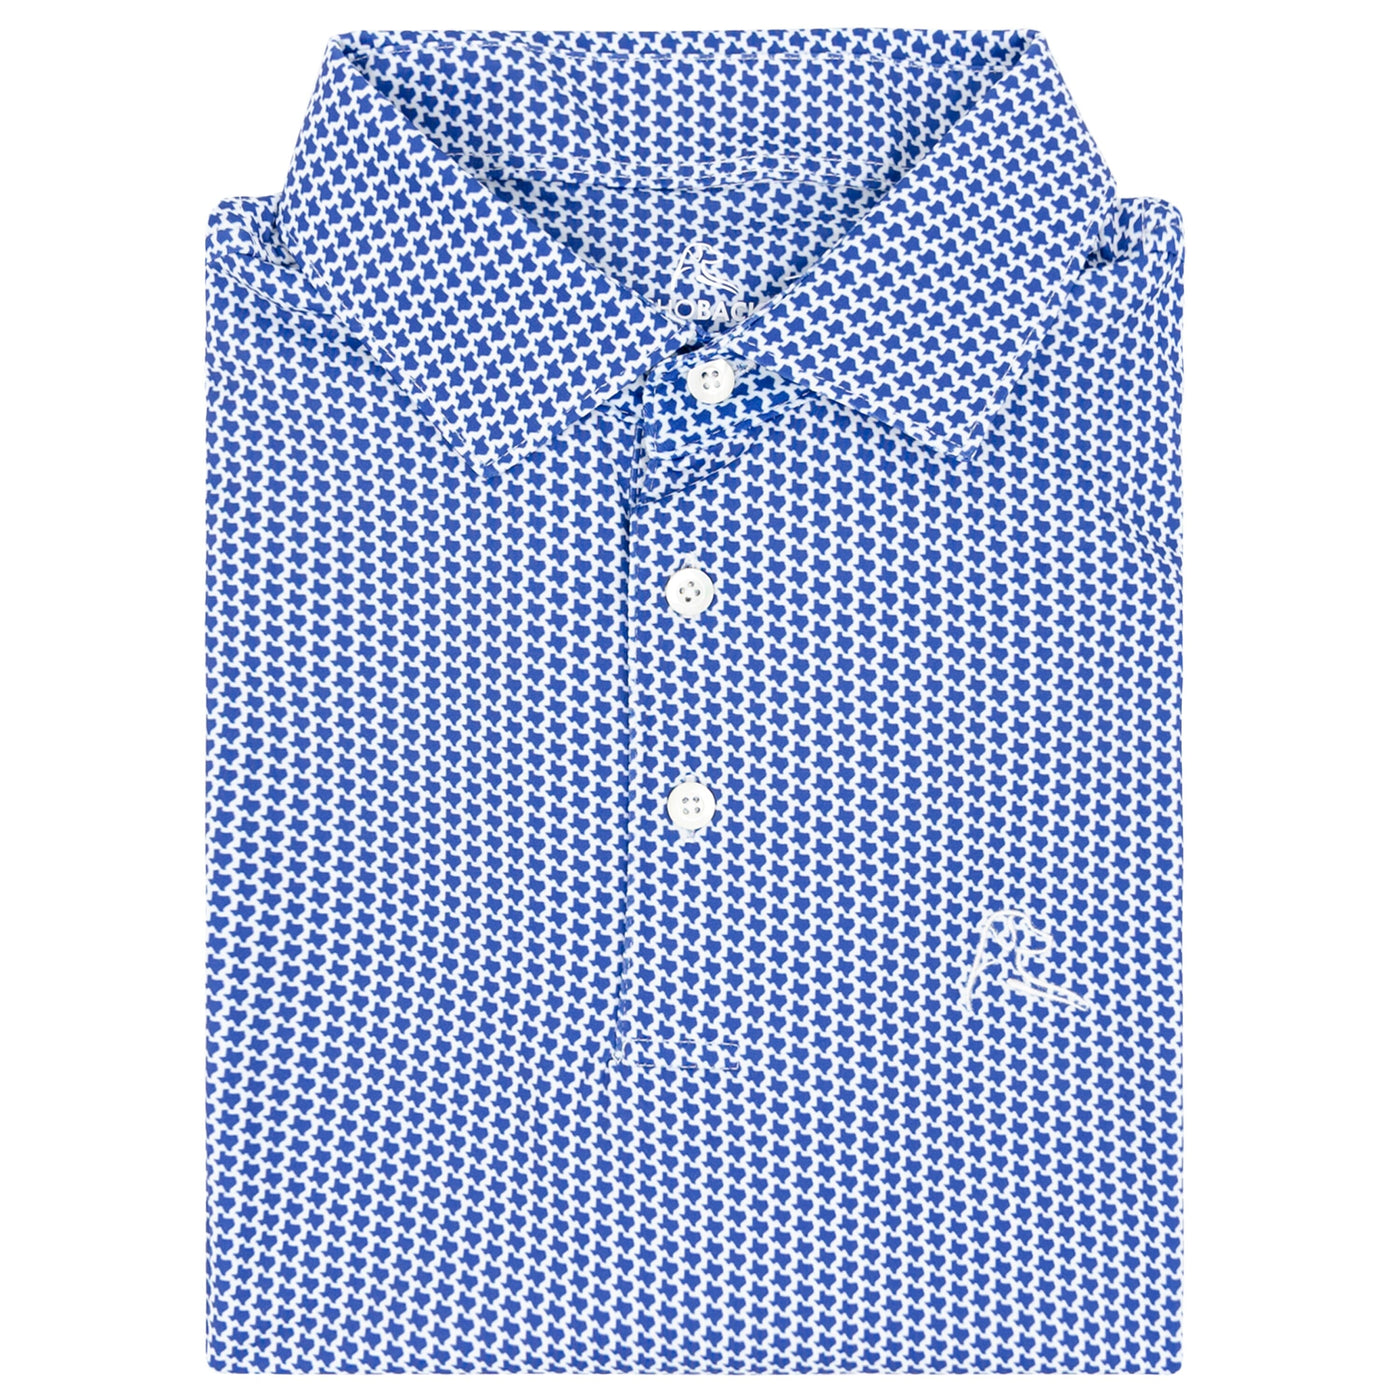 The Don’t Mess | Performance Polo | The Don’t Mess - Ocean Blue/White